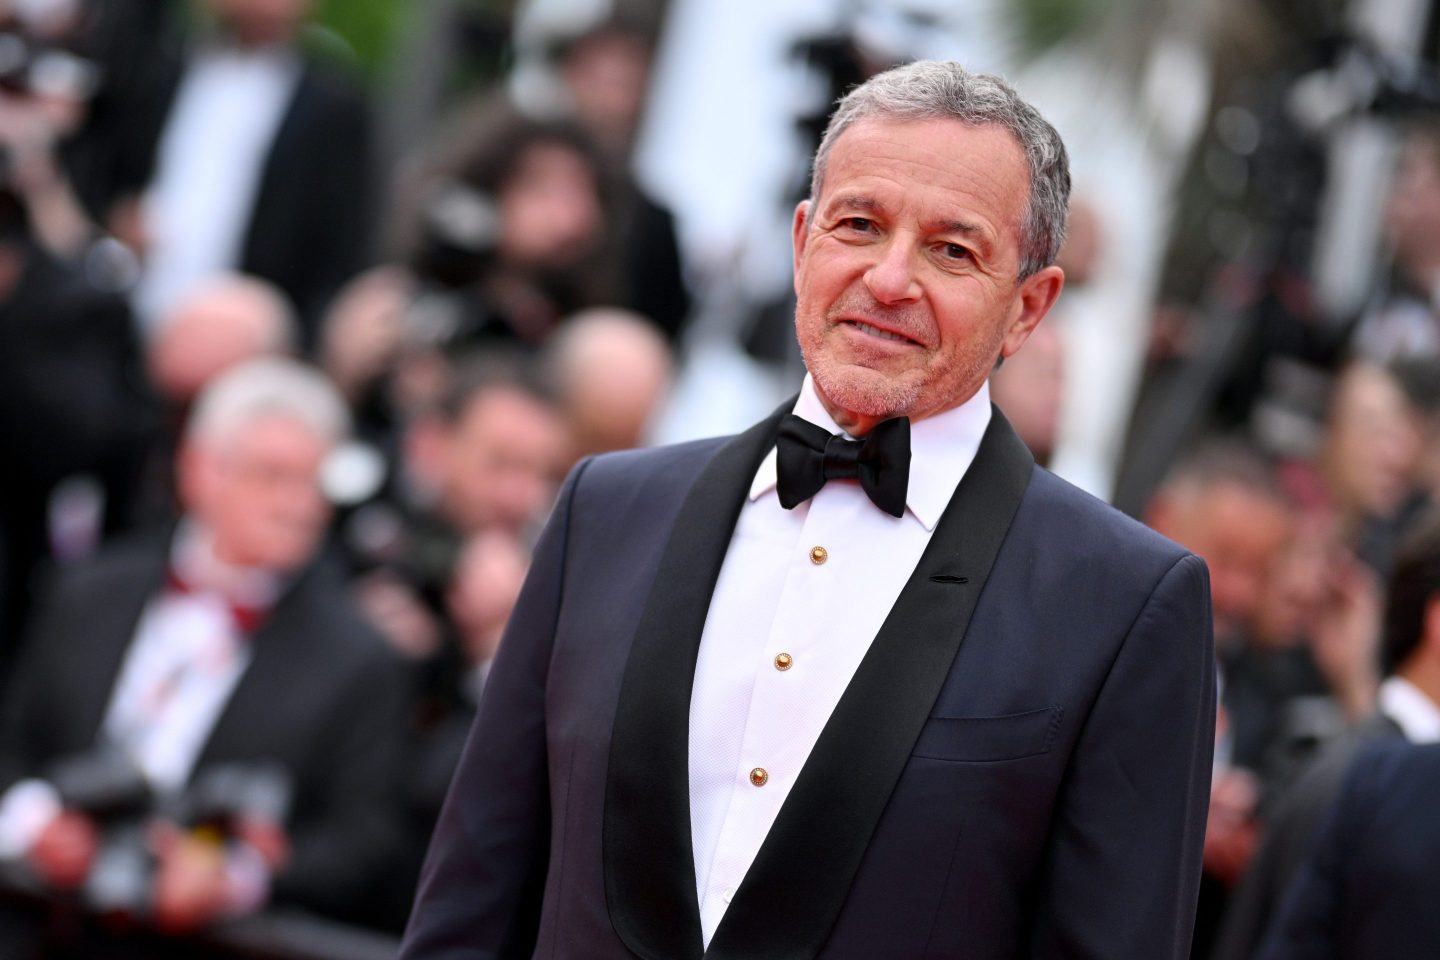 Disney CEO Bob Iger at the Cannes Film Festival premiere of Indiana Jones and the Dial of Destiny.